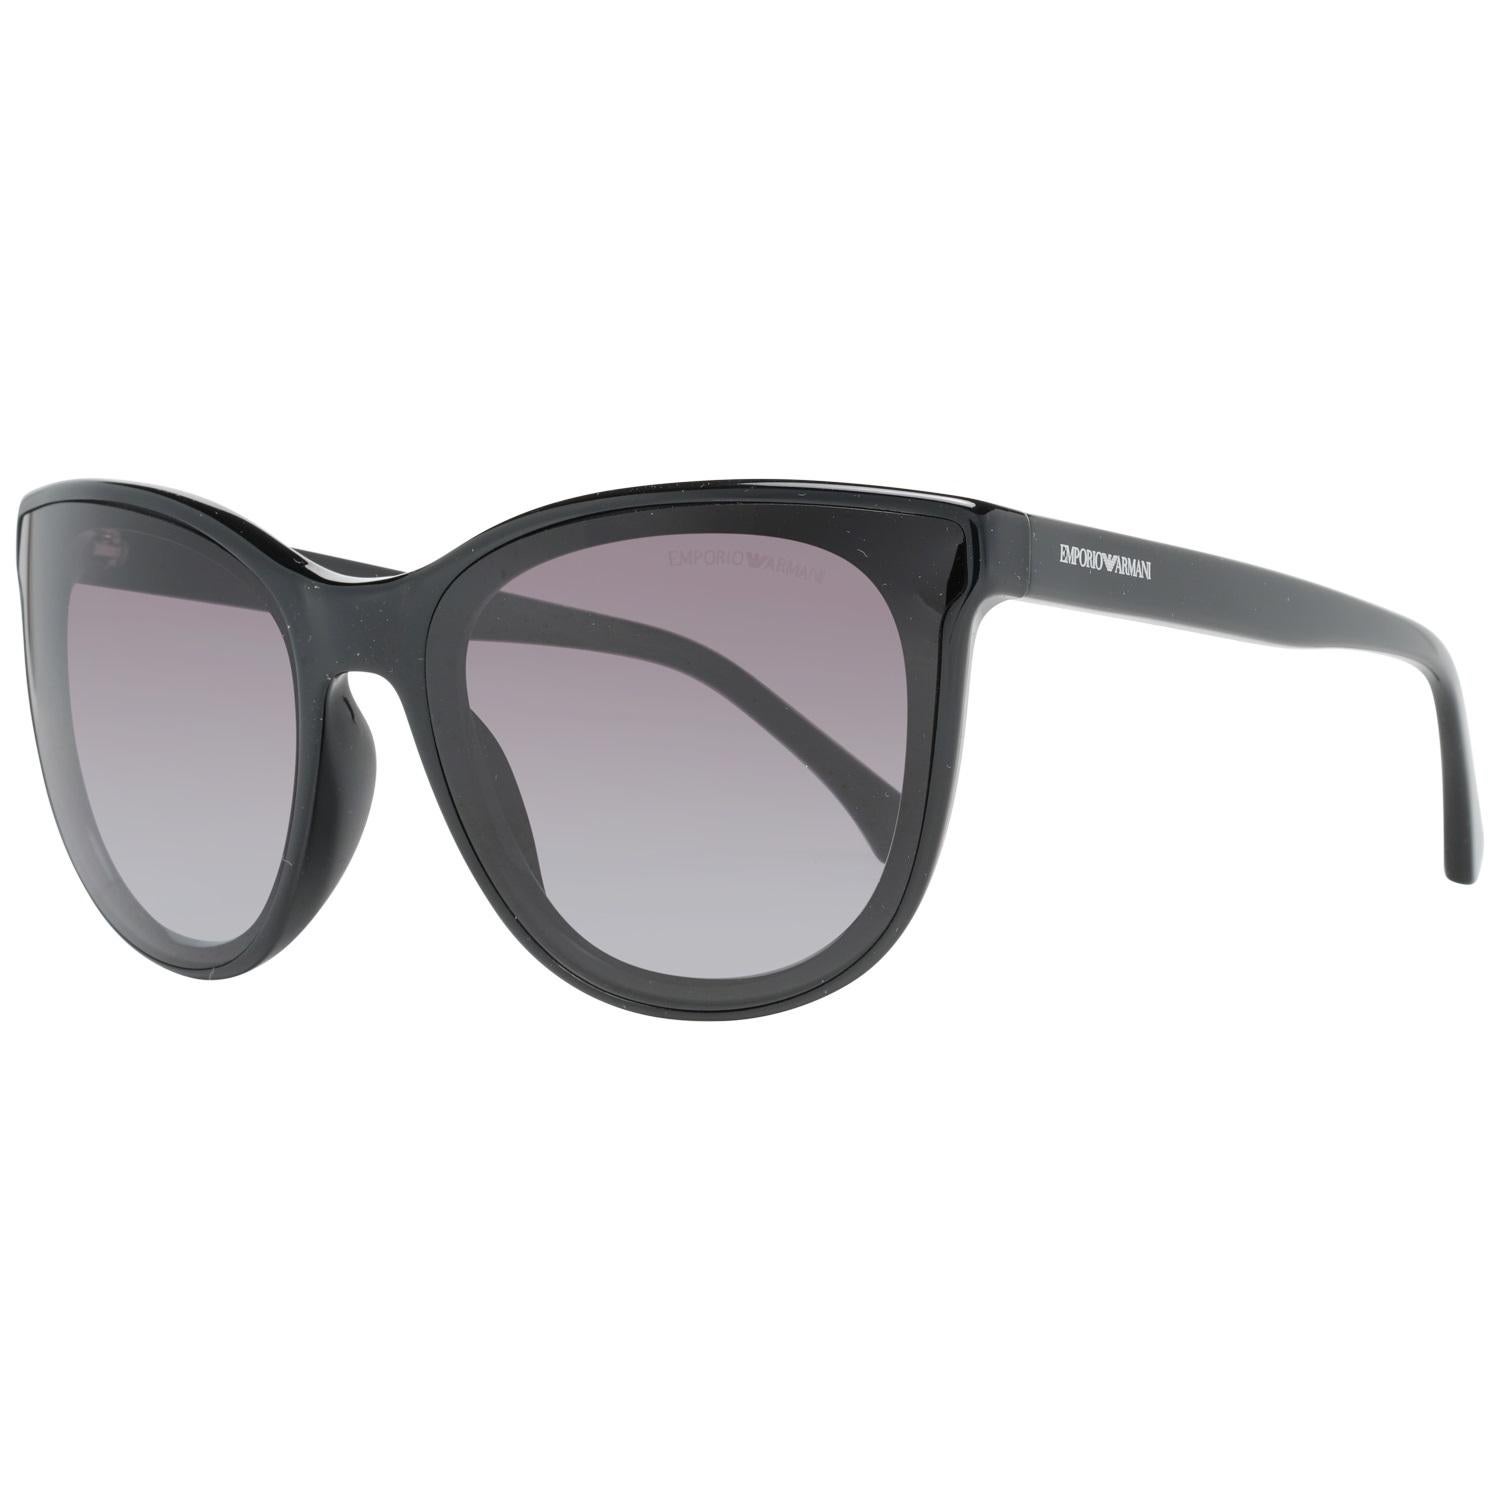 Emporio Armani Mint Women Sunglasses EA4125F. Cat eye acetate black frame. Gradient Grey lenses. Imported

Condition

A+ - MINT

Never worn or Used. As seen in pictures.

Details

MATERIAL: Plastic

COLOR: Black

MODEL: EA4125F

GENDER: Unisex